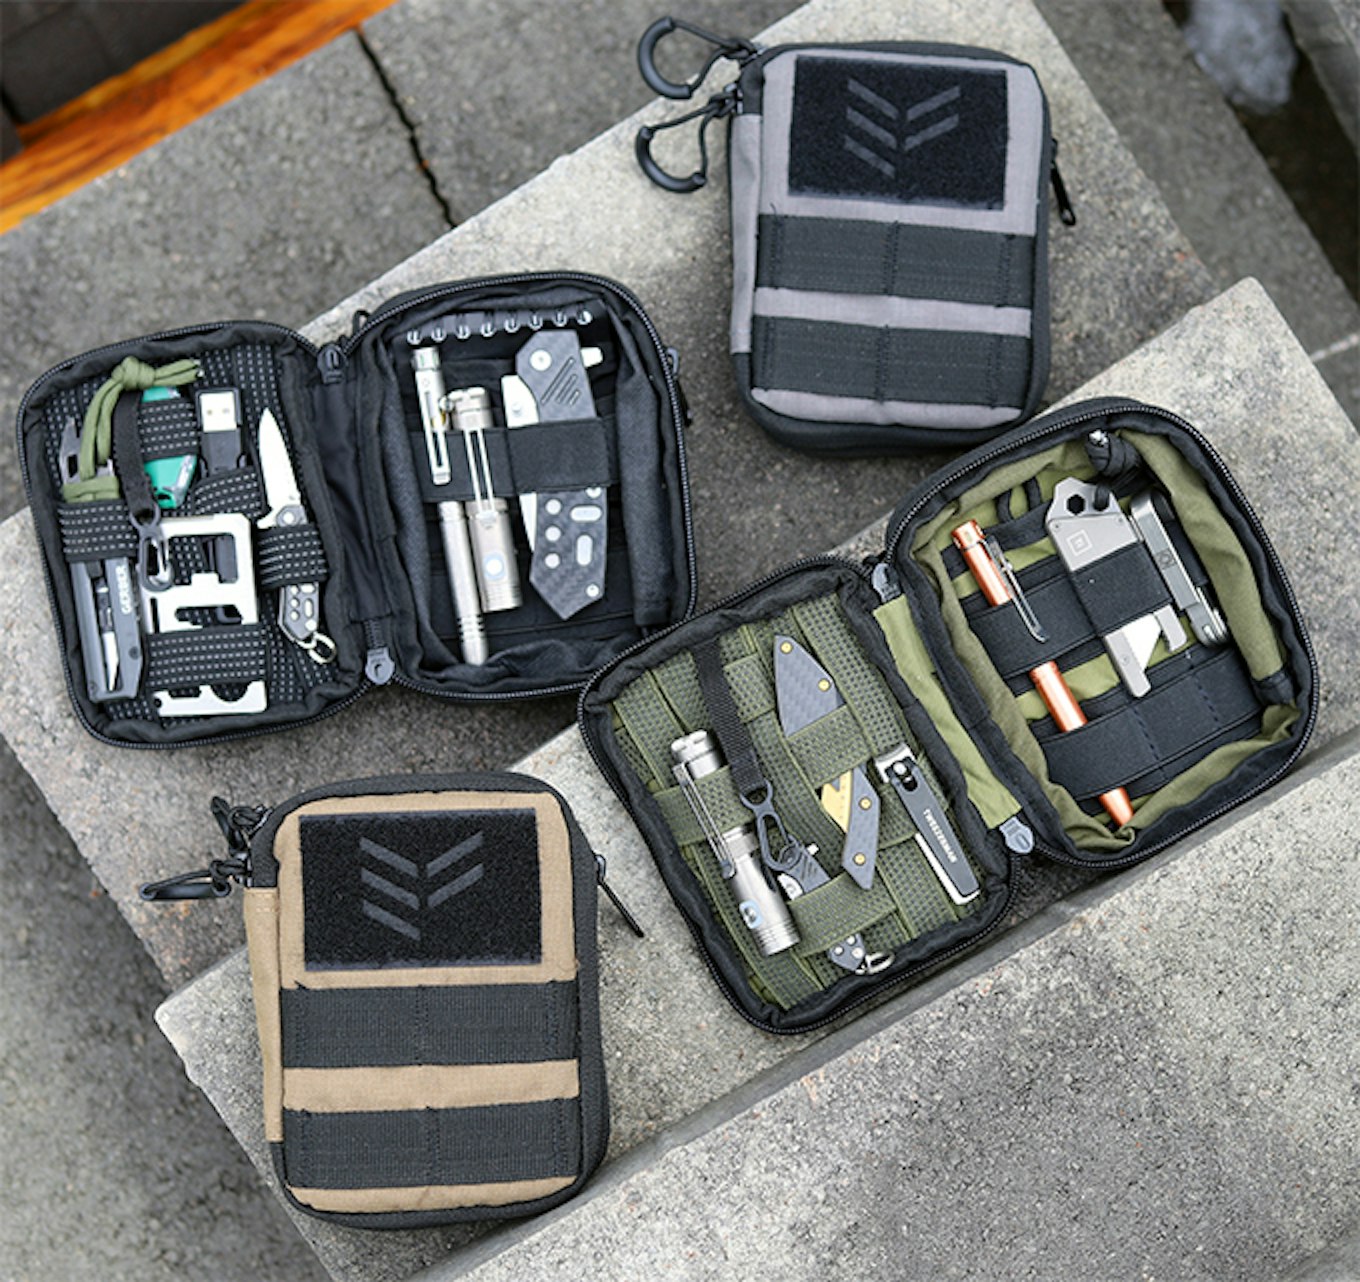 EDC Pouch Organizer for Everyday Carry Tactical Gear With